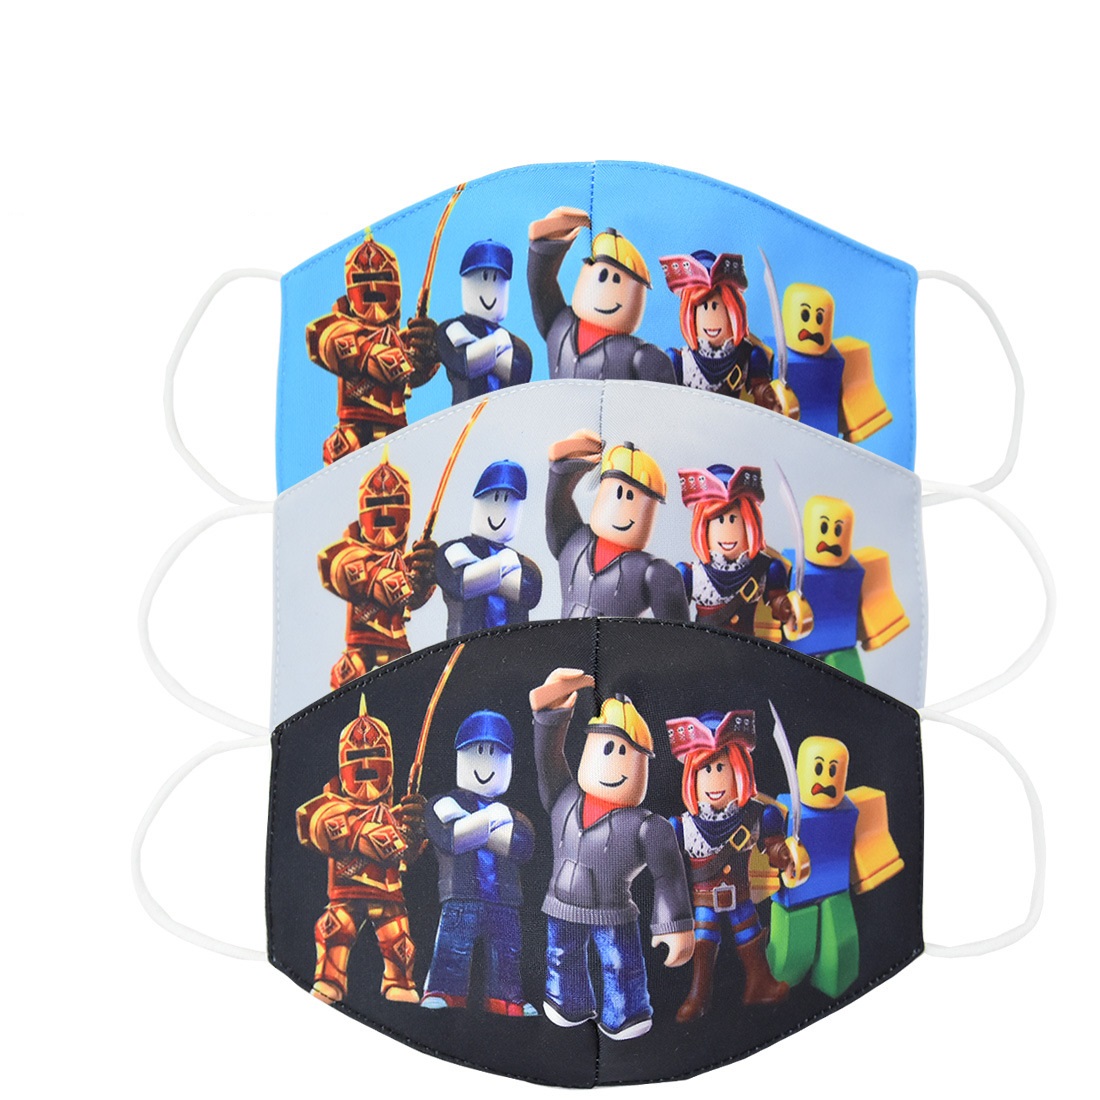 Roblox Printed Face Mask Cartoon Design Kids Baby Boys Cotton Masks Anti Dust Face Mask Shopee Indonesia - bendy mask roblox